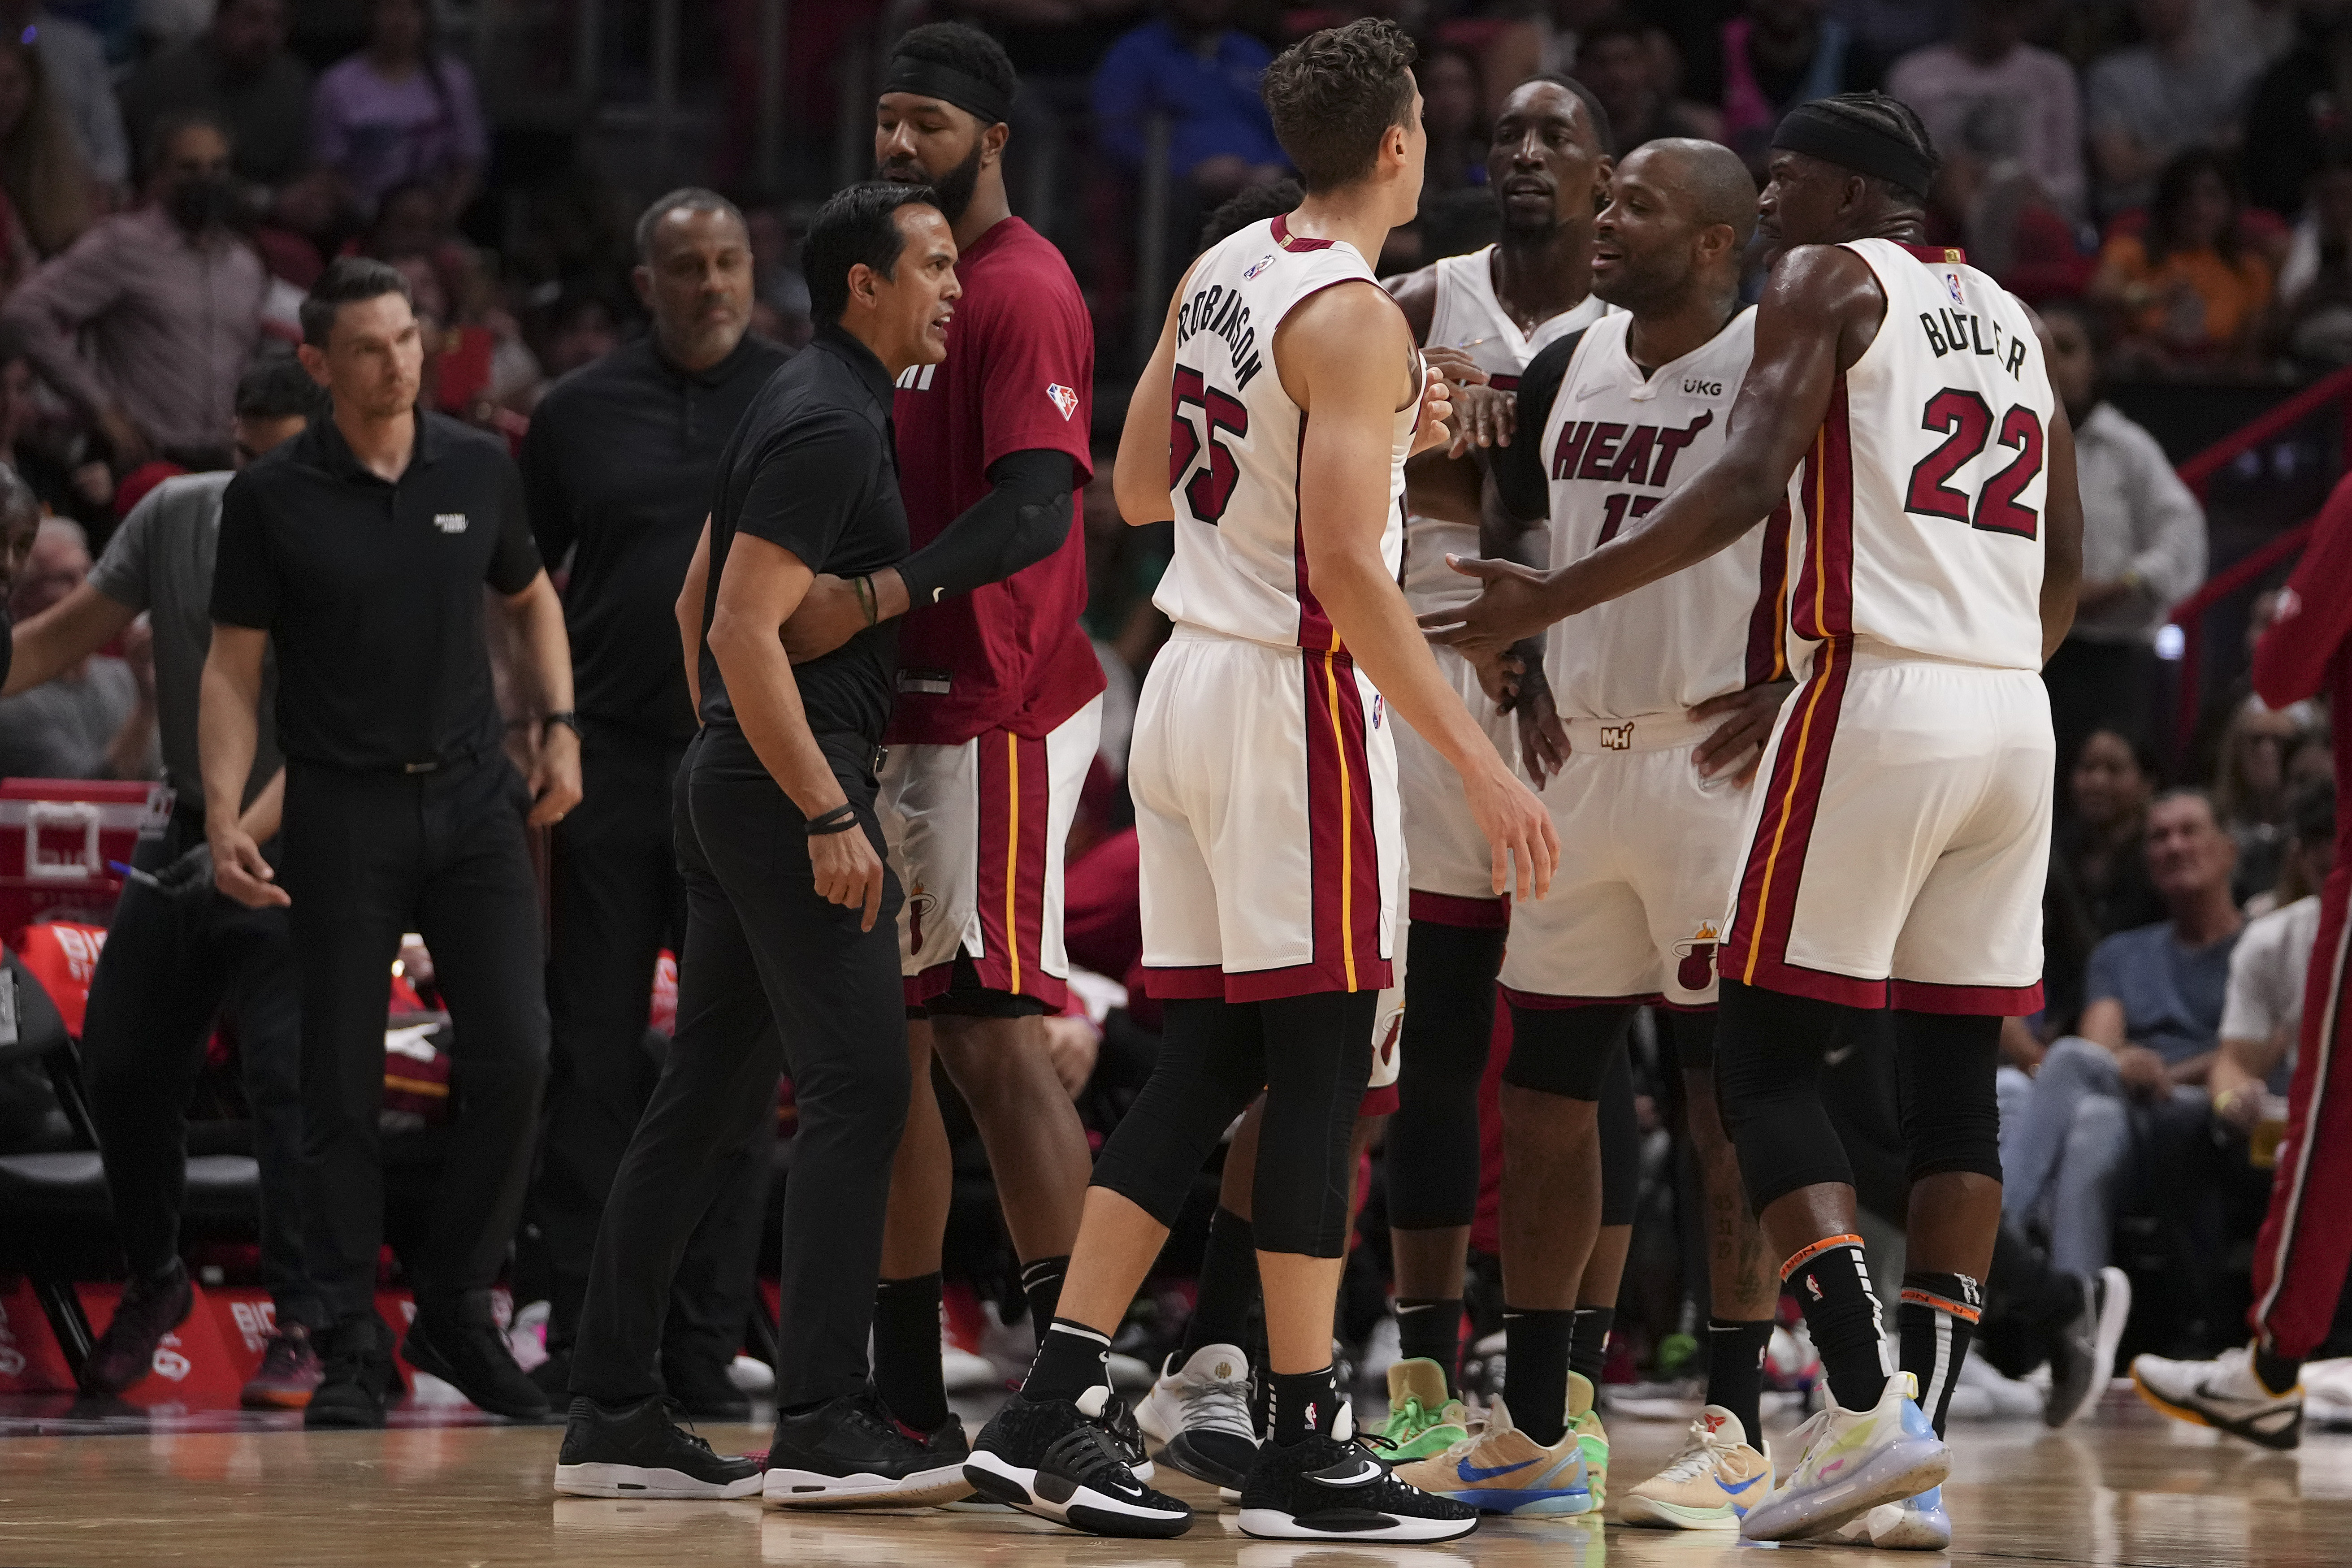 Miami Heat head coach Erik Spoelstra yells at Heat forward Jimmy Butler #22 during an NBA game against the Golden State Warriors in March 2022